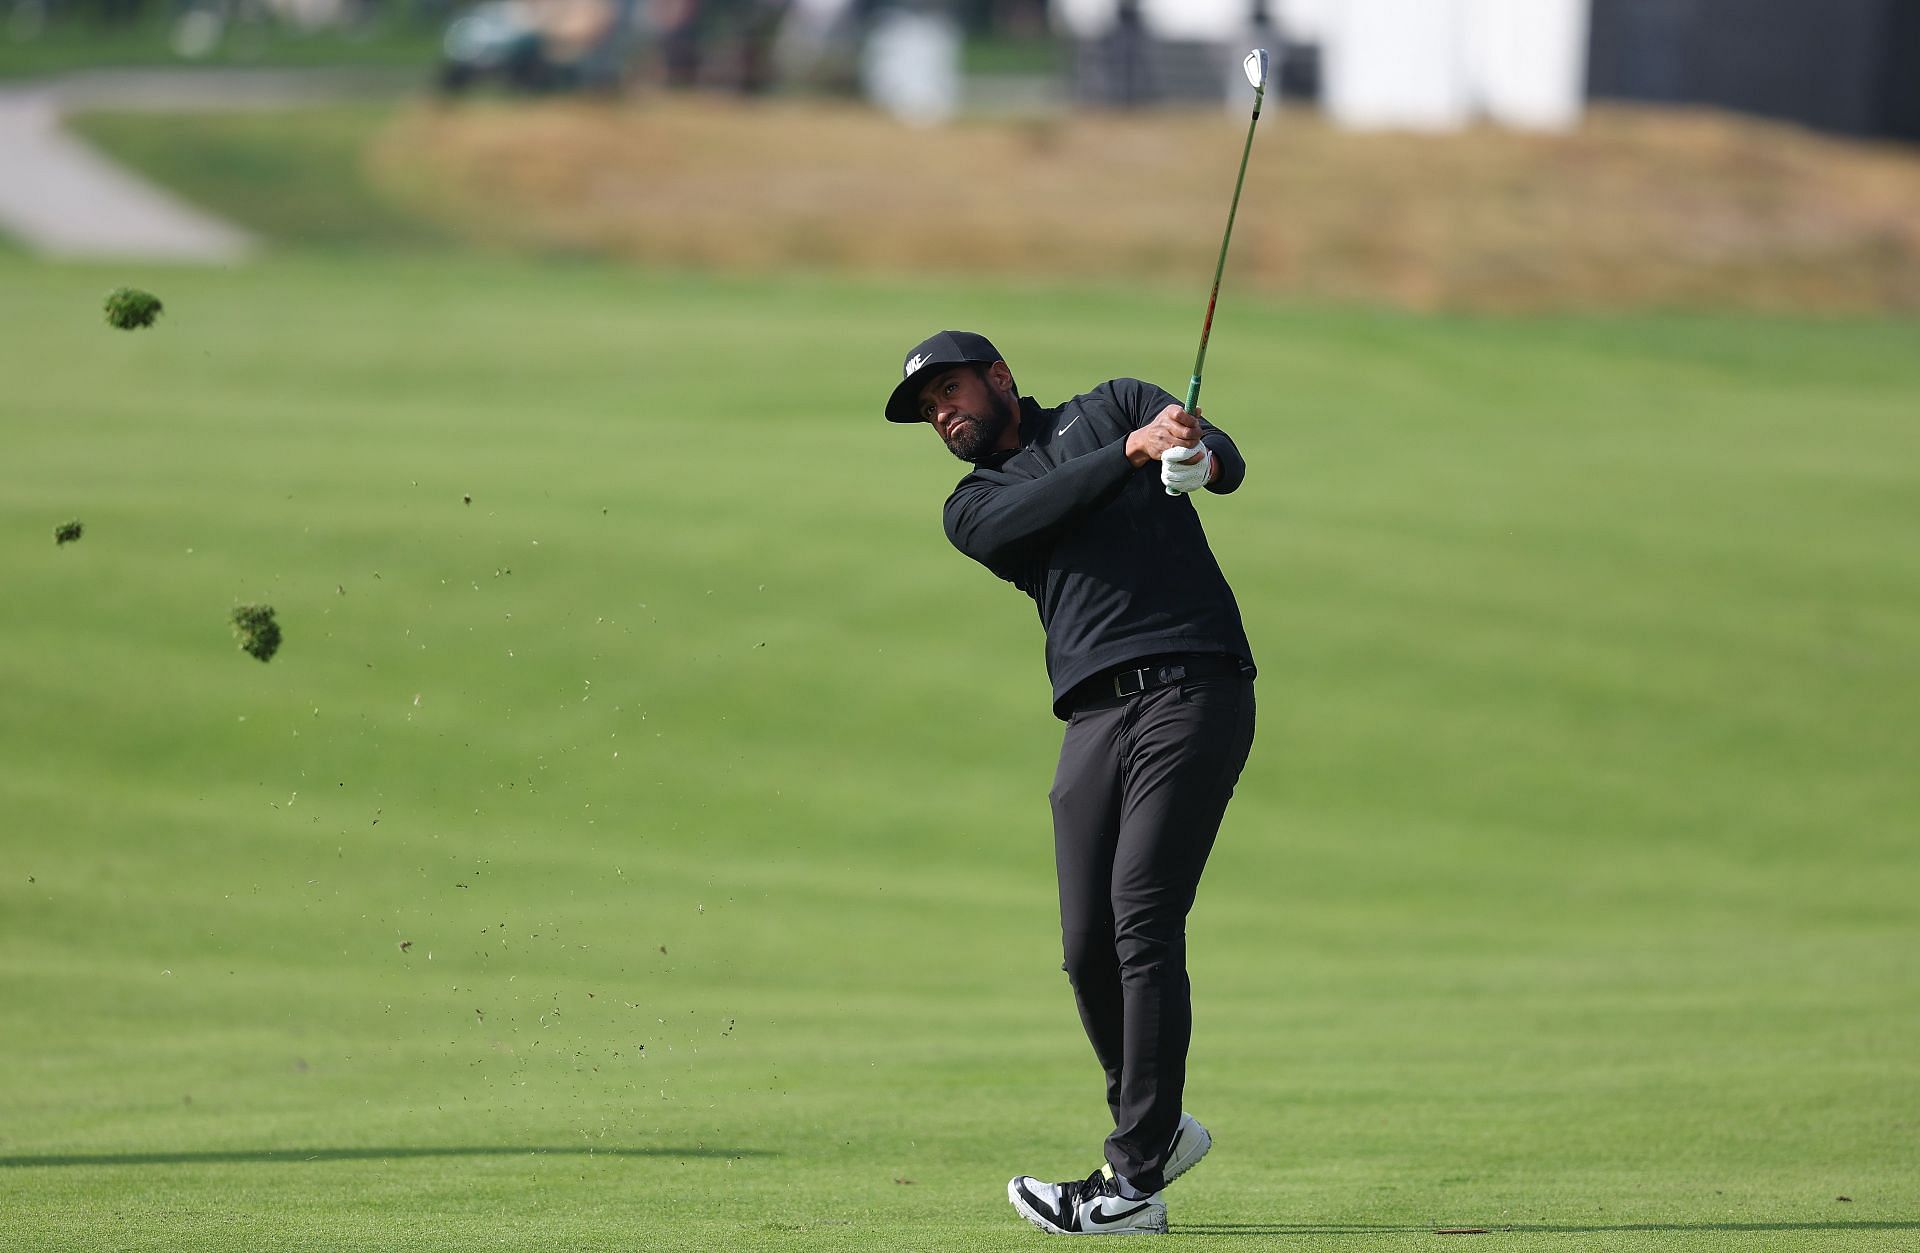 Tony Finau will enjoy the good weather at the Mexico Open